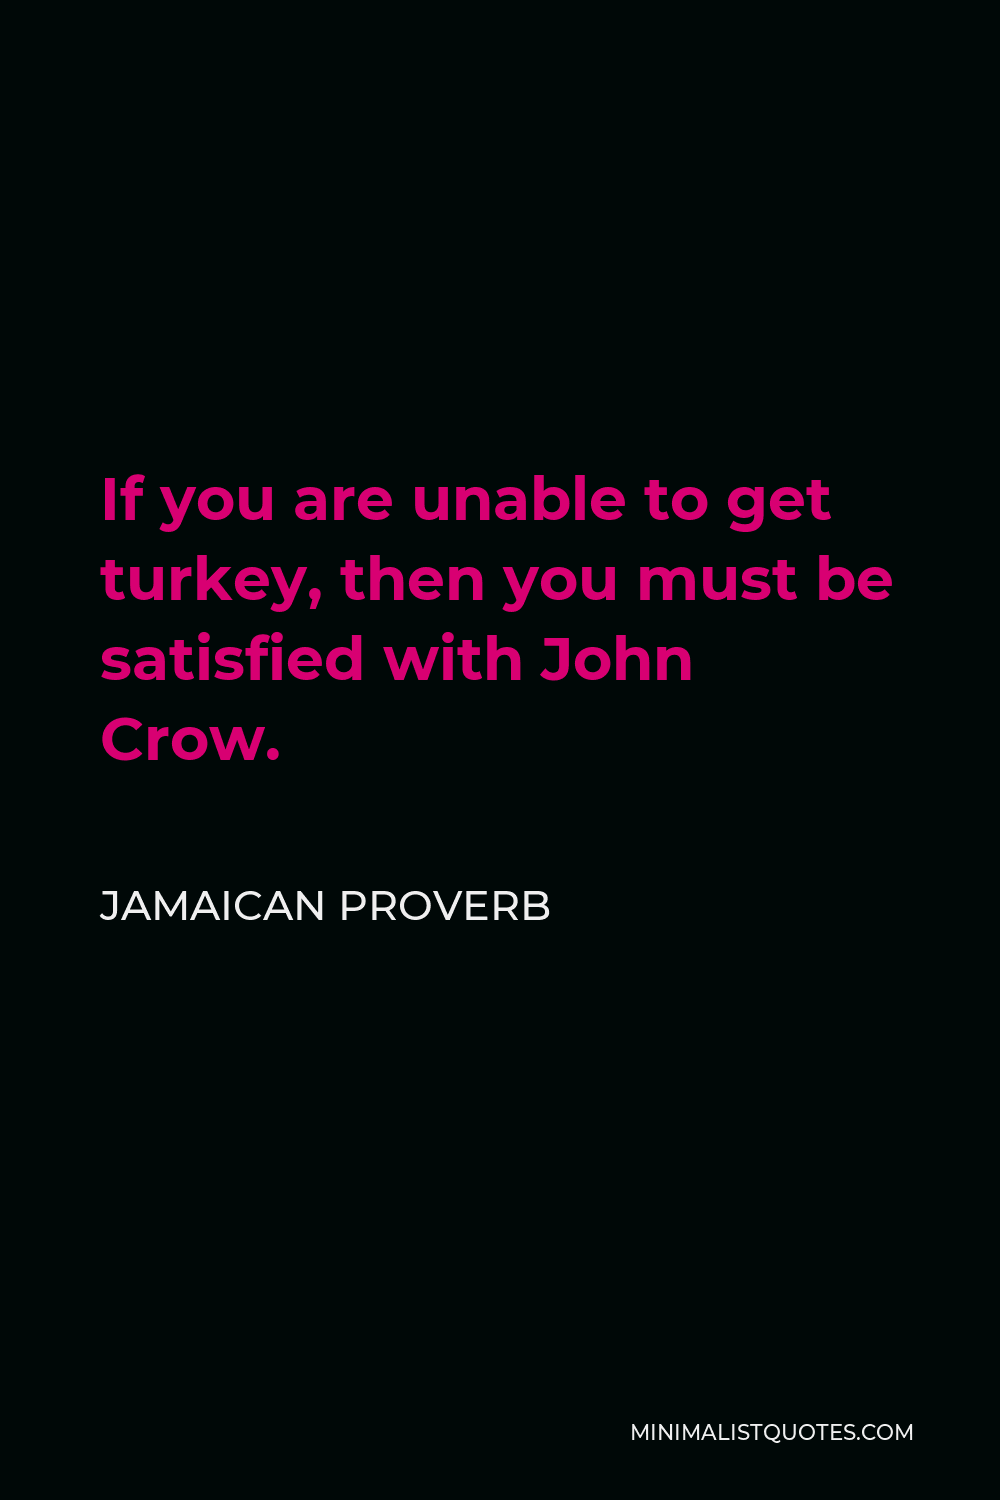 Jamaican Proverb Quote - If you are unable to get turkey, then you must be satisfied with John Crow.